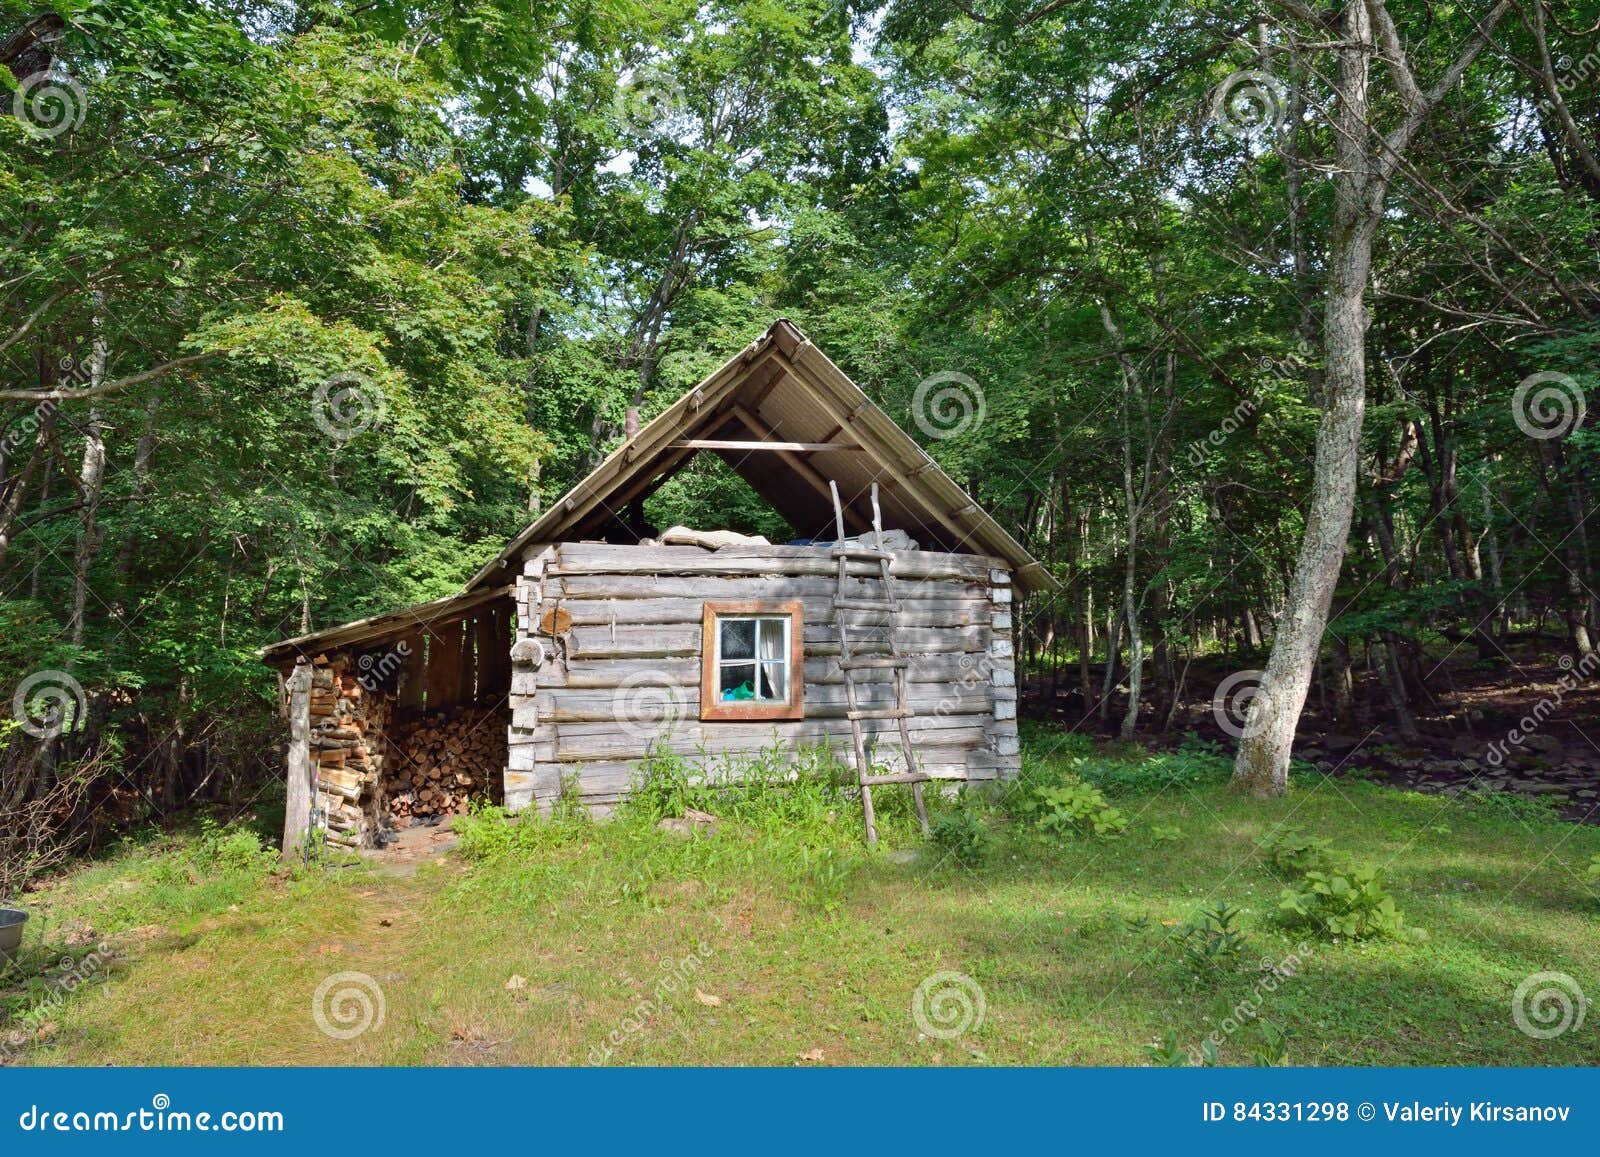 Cabin in forest 3 stock photo. Image of timbered, small - 84331298